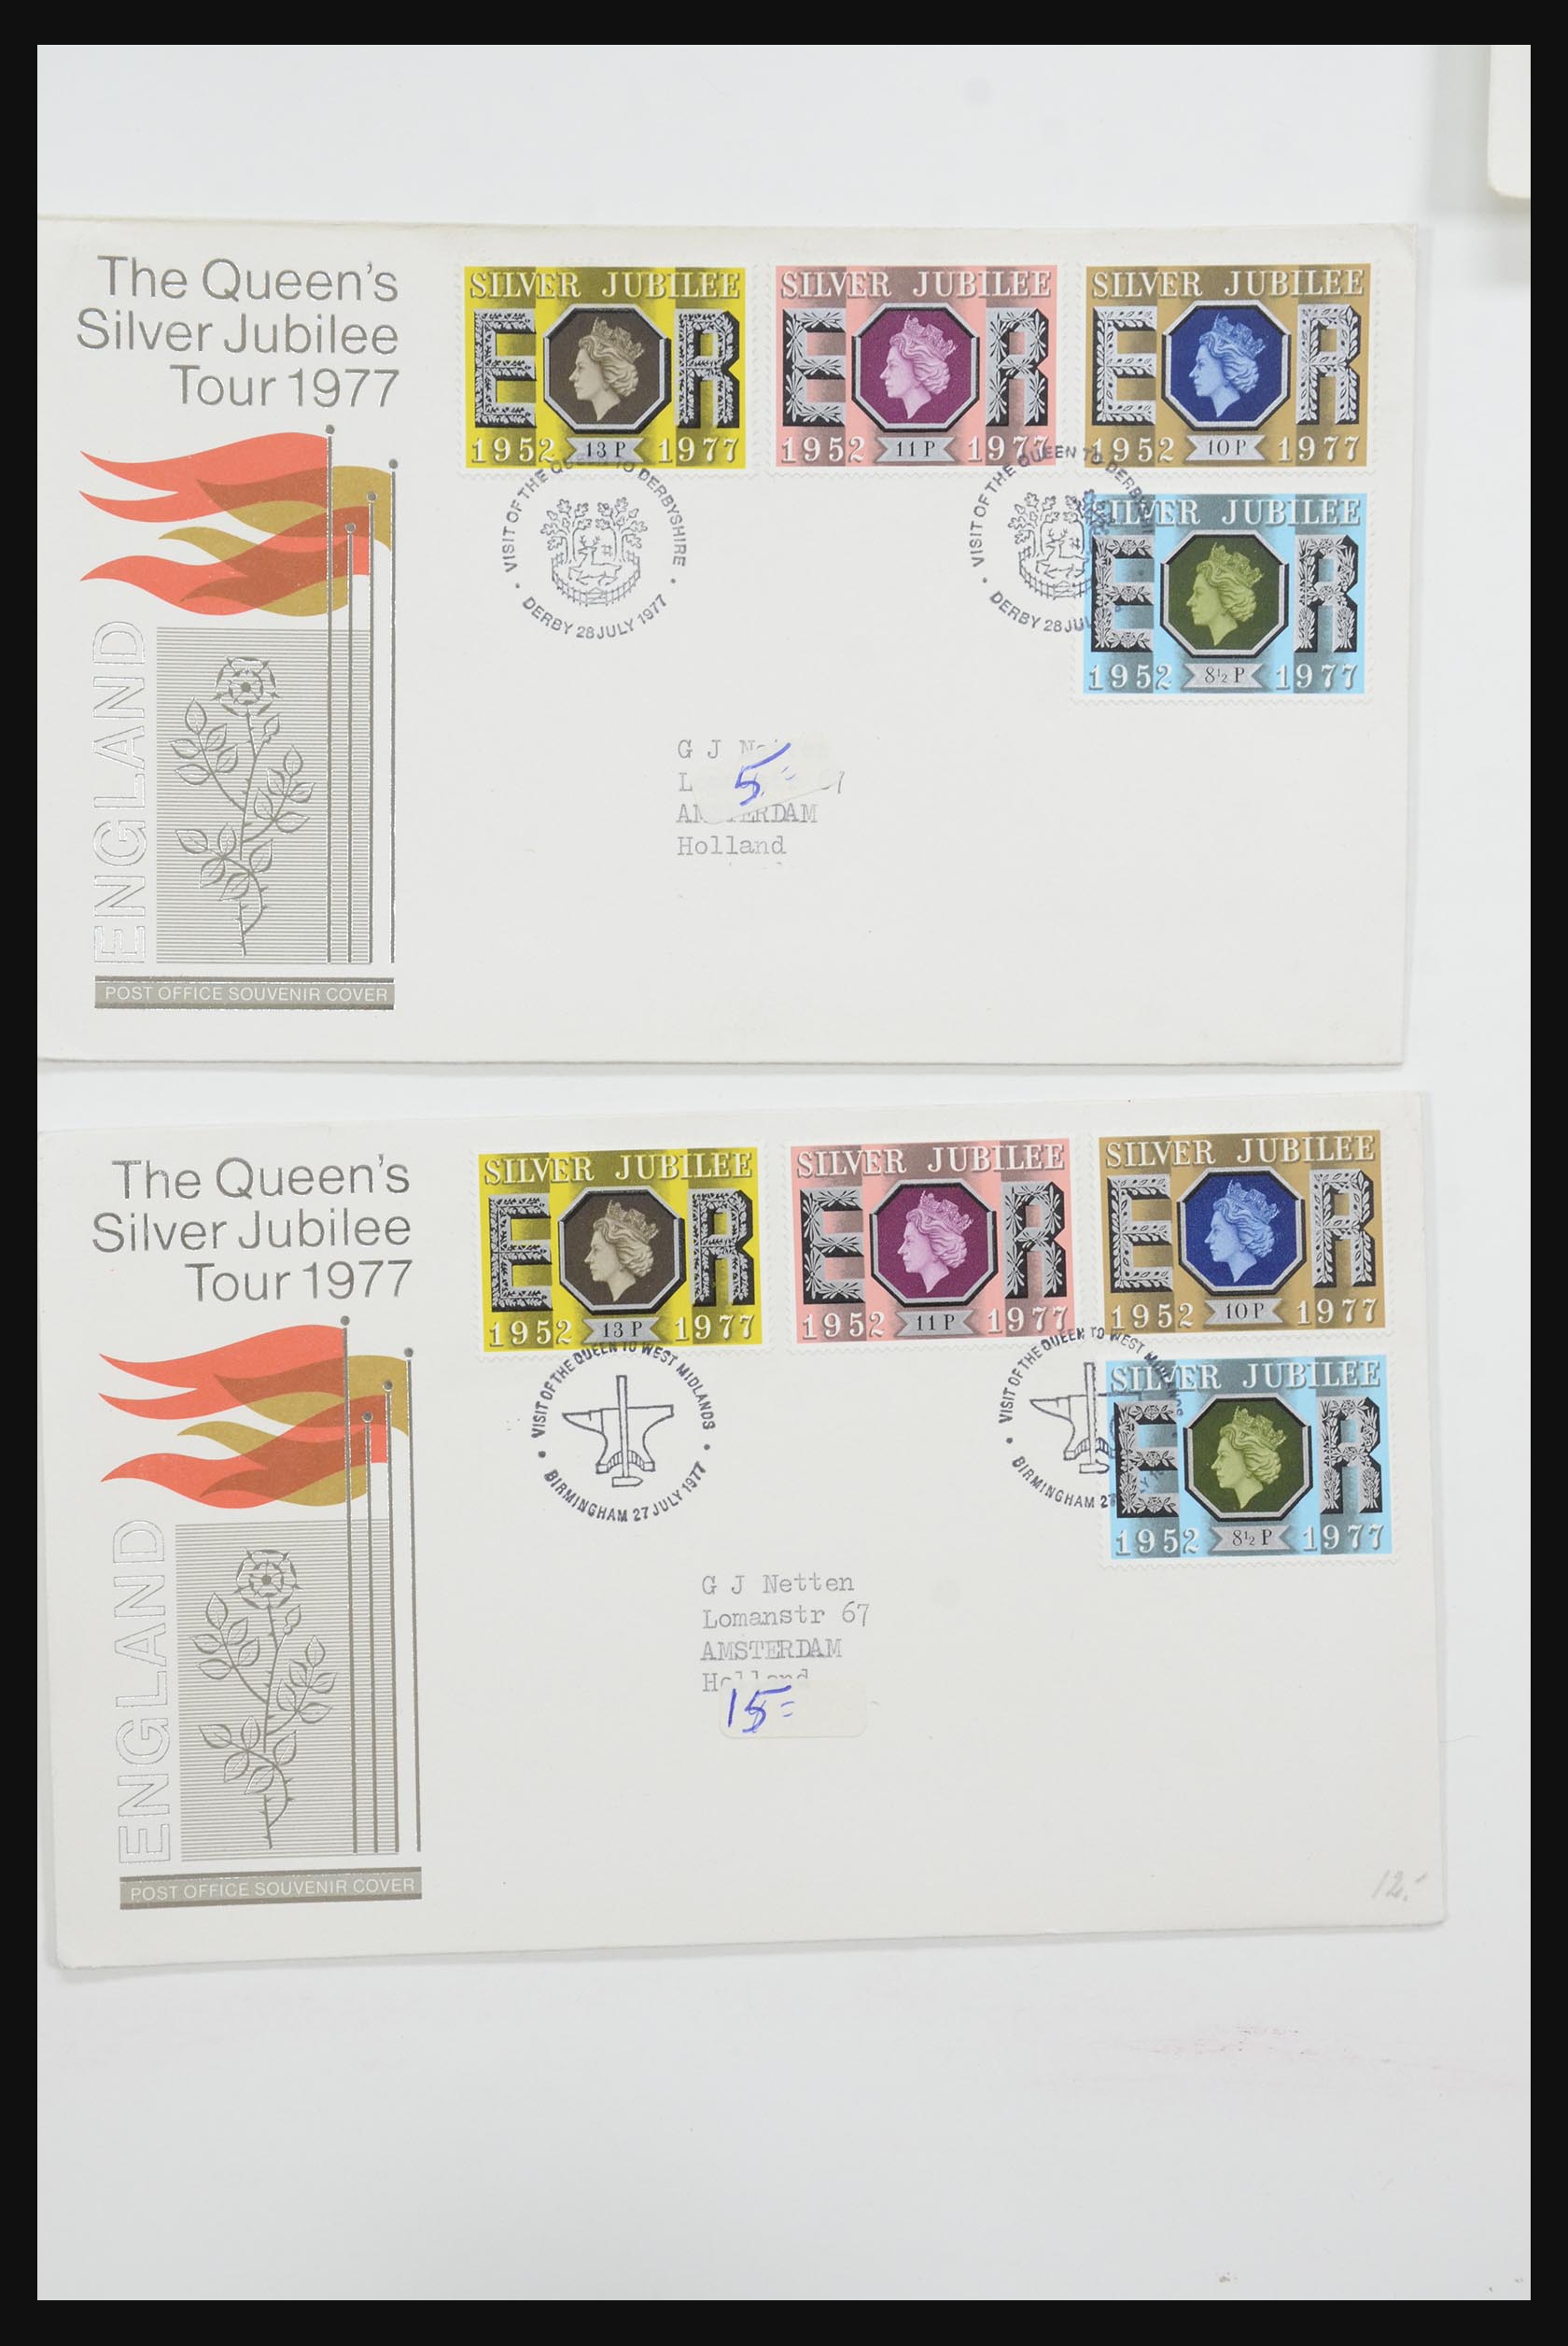 31726 025 - 31726 Great Britain and colonies covers and FDC's 1937-2001.